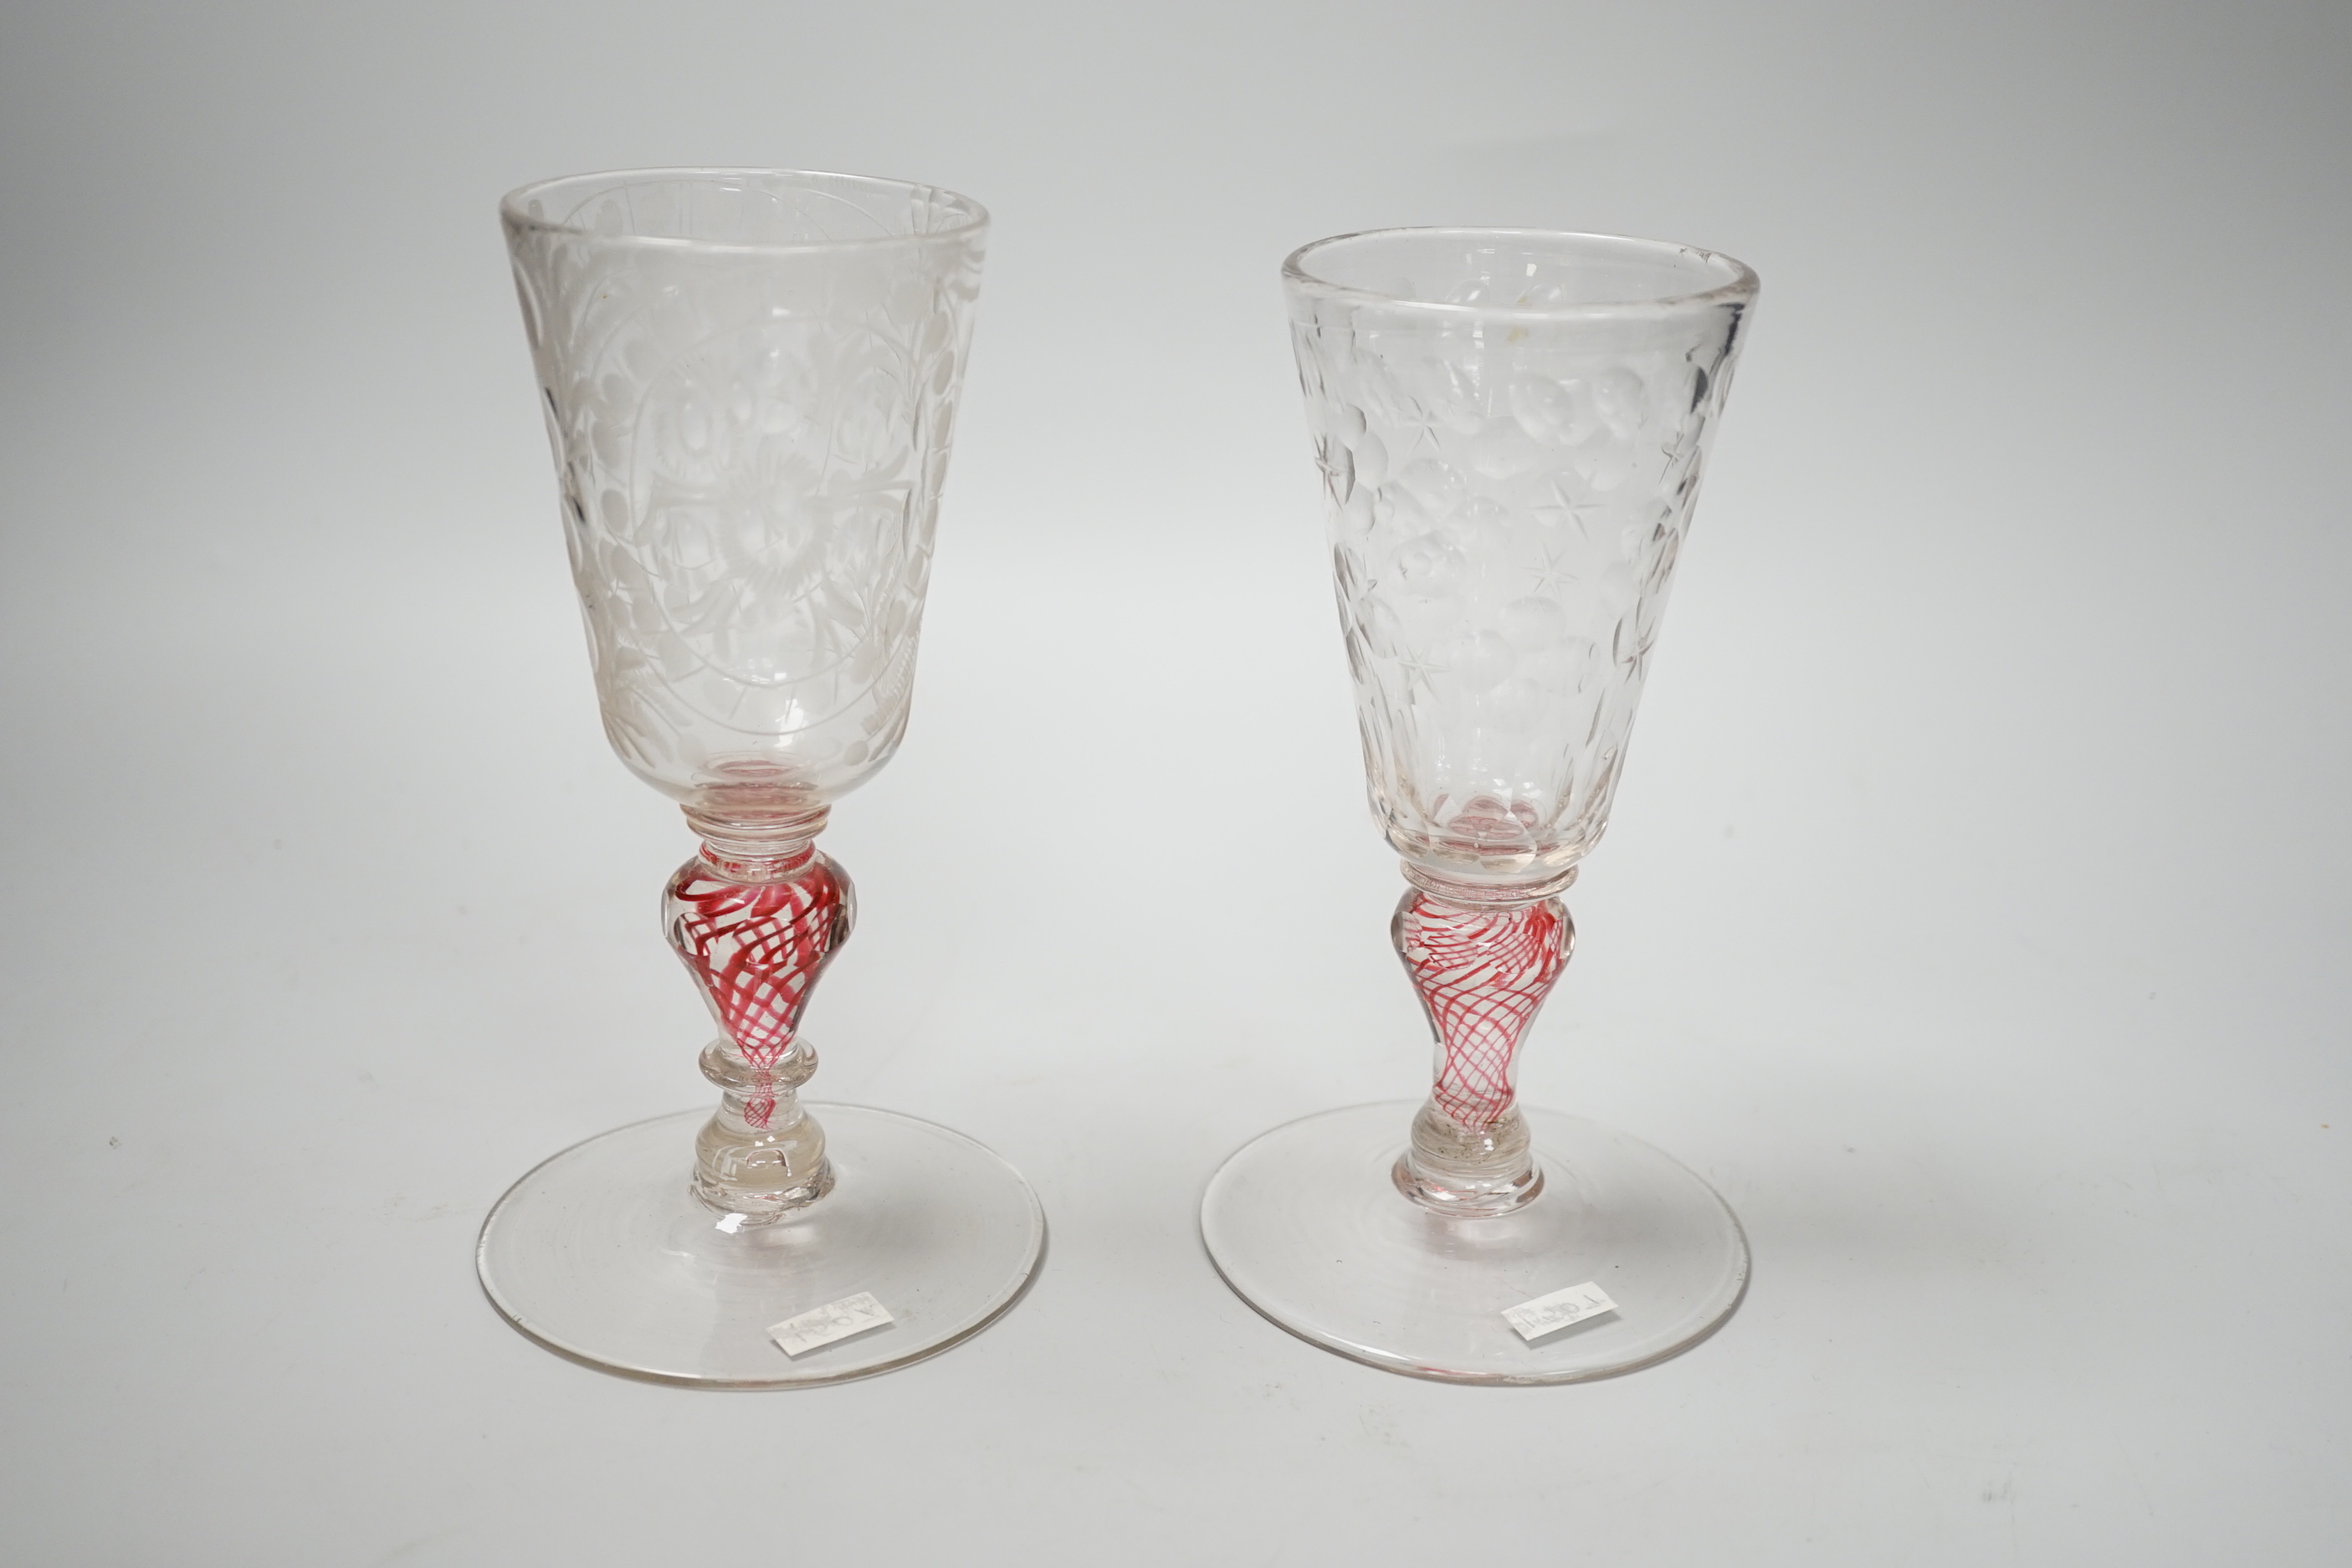 Two similar 18th century Continental goblets, both with elongated bowls heavily engraved with polished roundels, on inverted baluster stems including red colour twists and various collars, conical feet with rough pontils